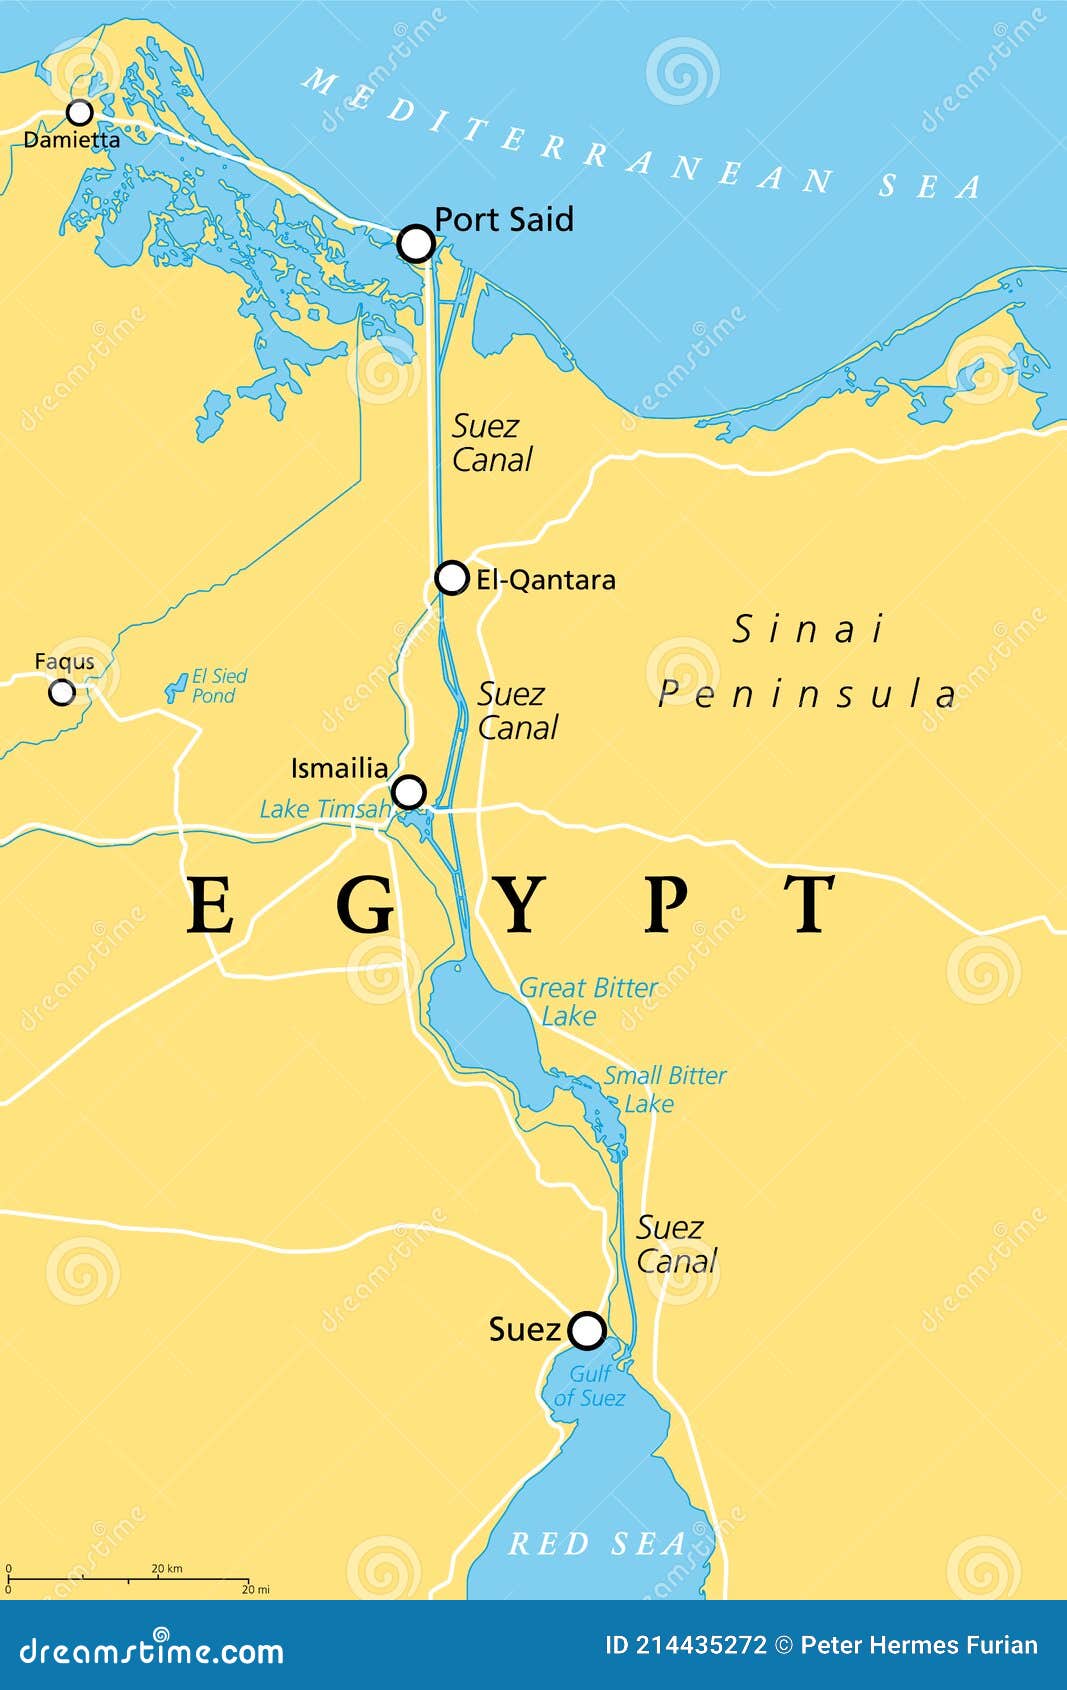 suez canal, artificial sea-level waterway in egypt, political map